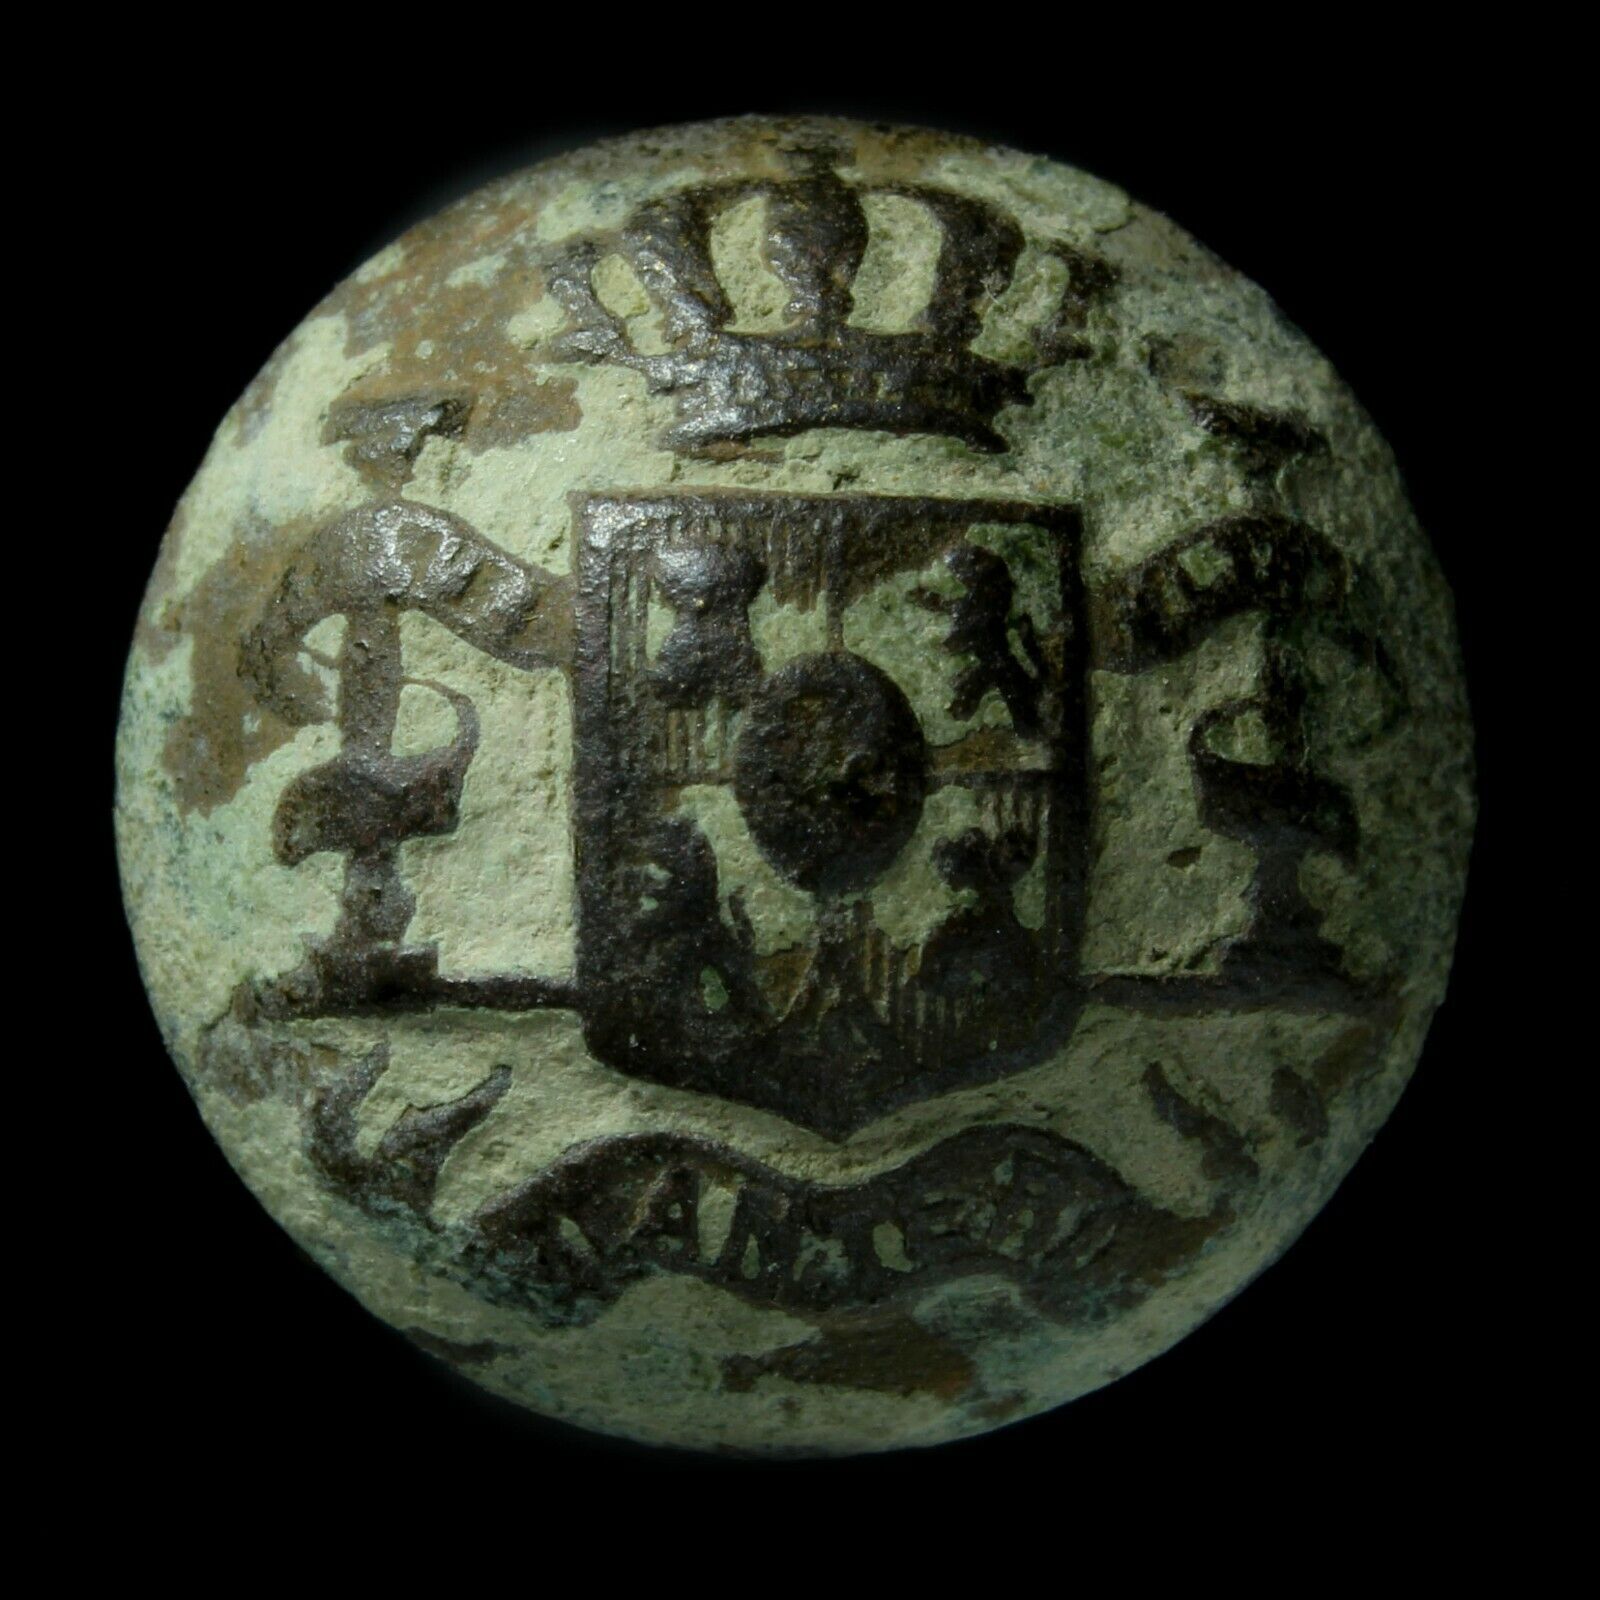  Infantry Button, Napoleonic War, 13 mm.